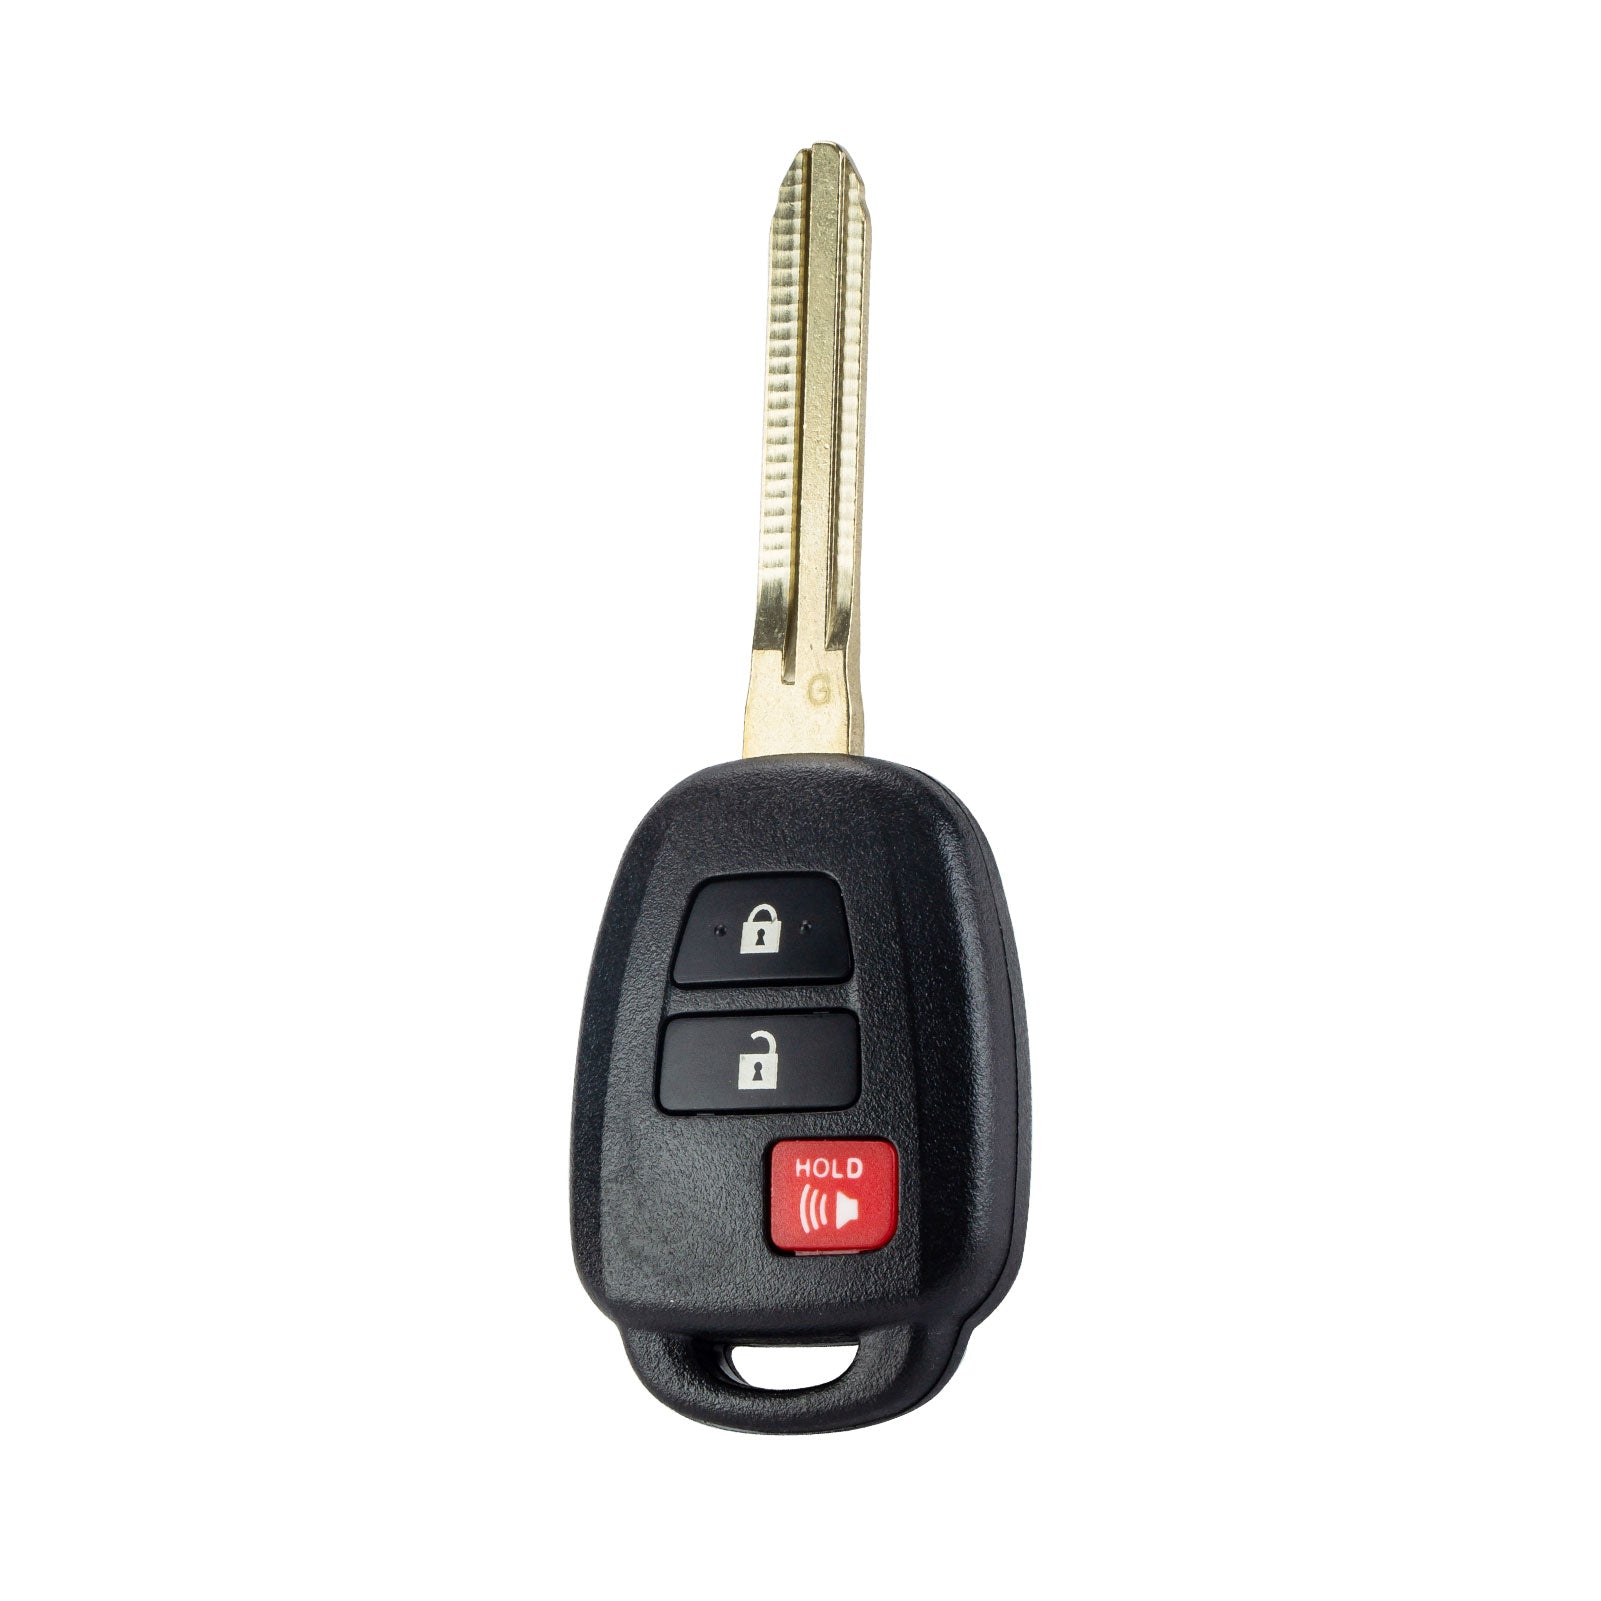 Replacement for Keyless Entry Remote Car Key Fob fit for Toyota 2012-2016 Prius C 3 Button G Chip HYQ12BDM KR-T3SB